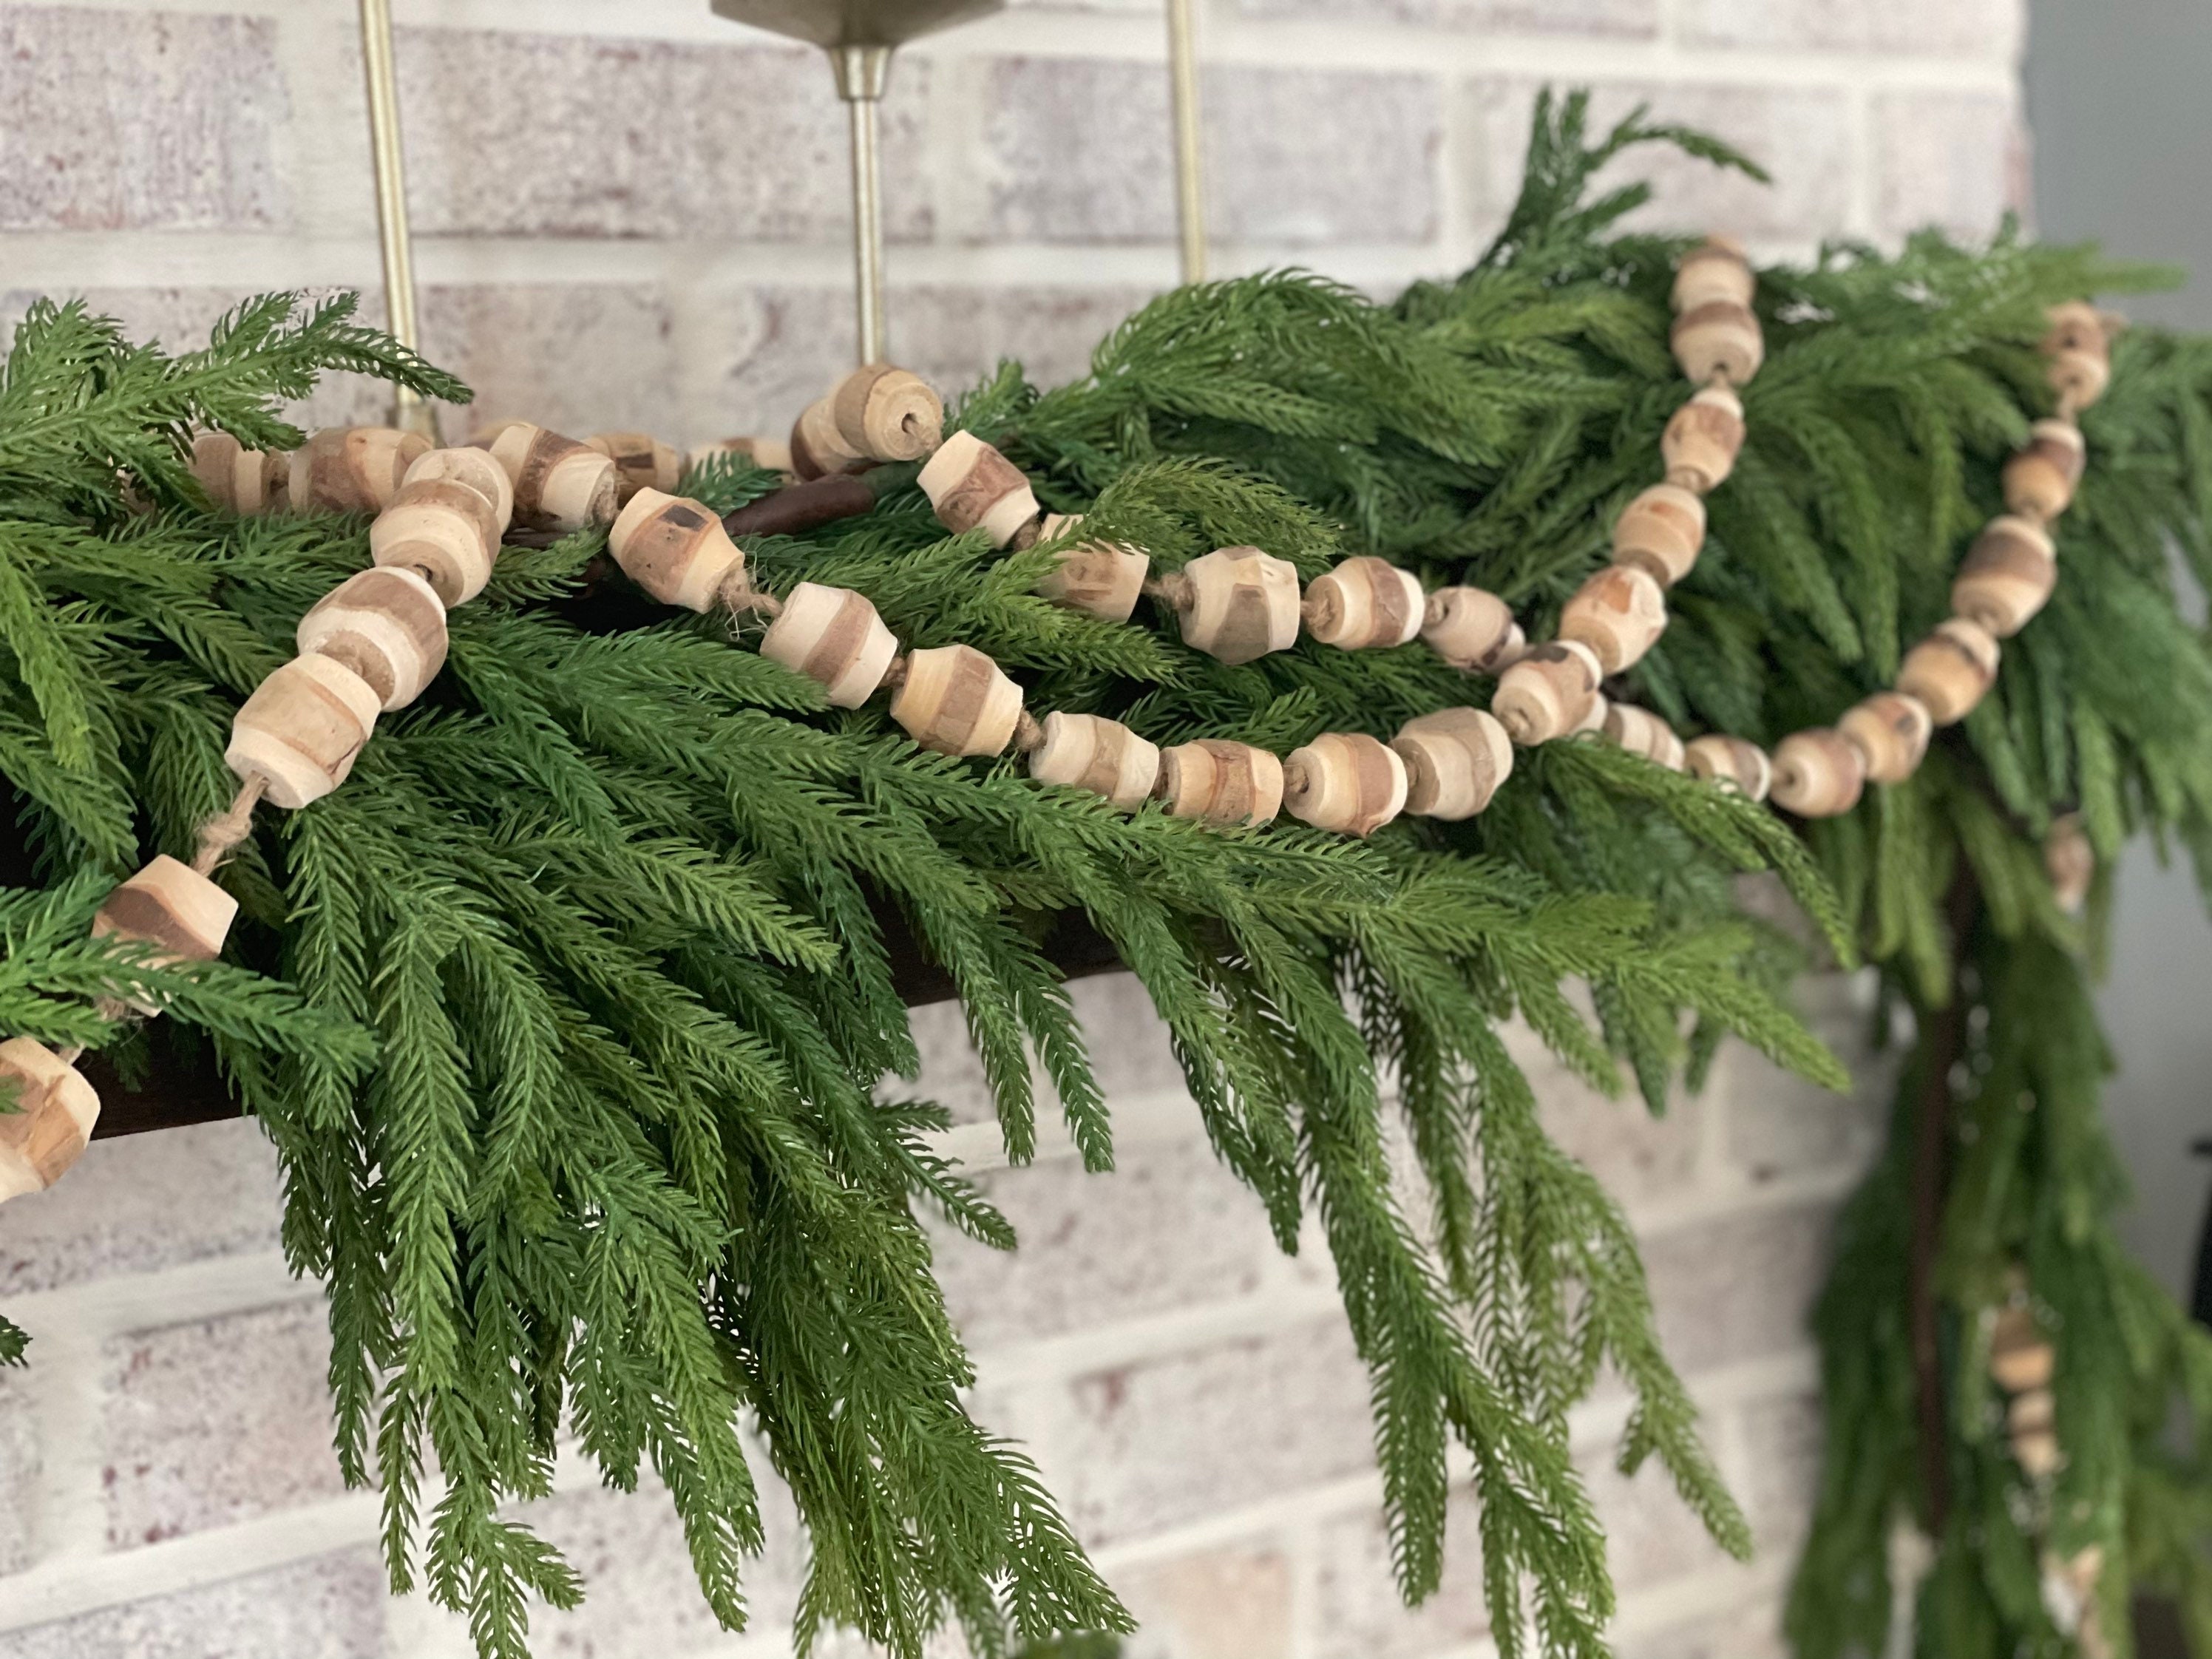 70 ft Wooden Cranberry Red Beads Garland. Primitive Christmas Tree  Ornaments.